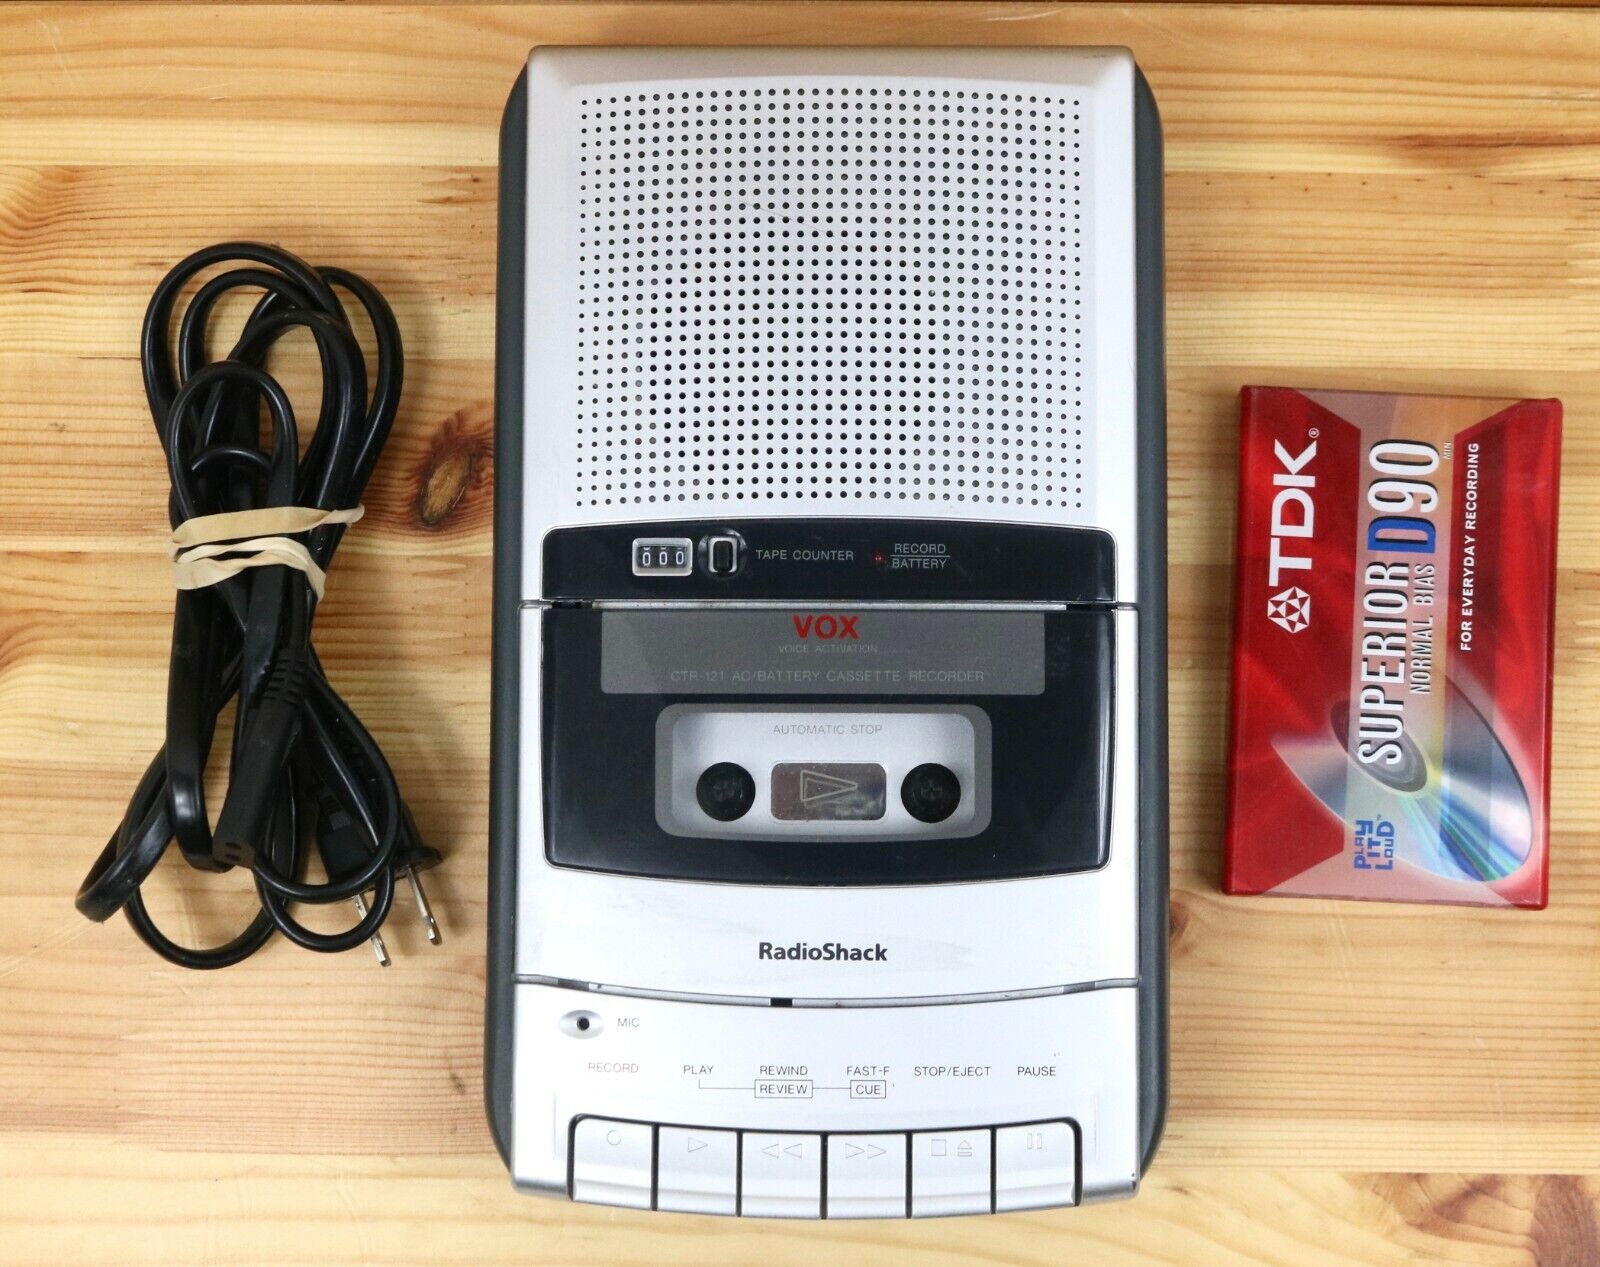 Radio Shack CTR 121 Vox Cassette Tape Recorder with Cord Tested Works Great 